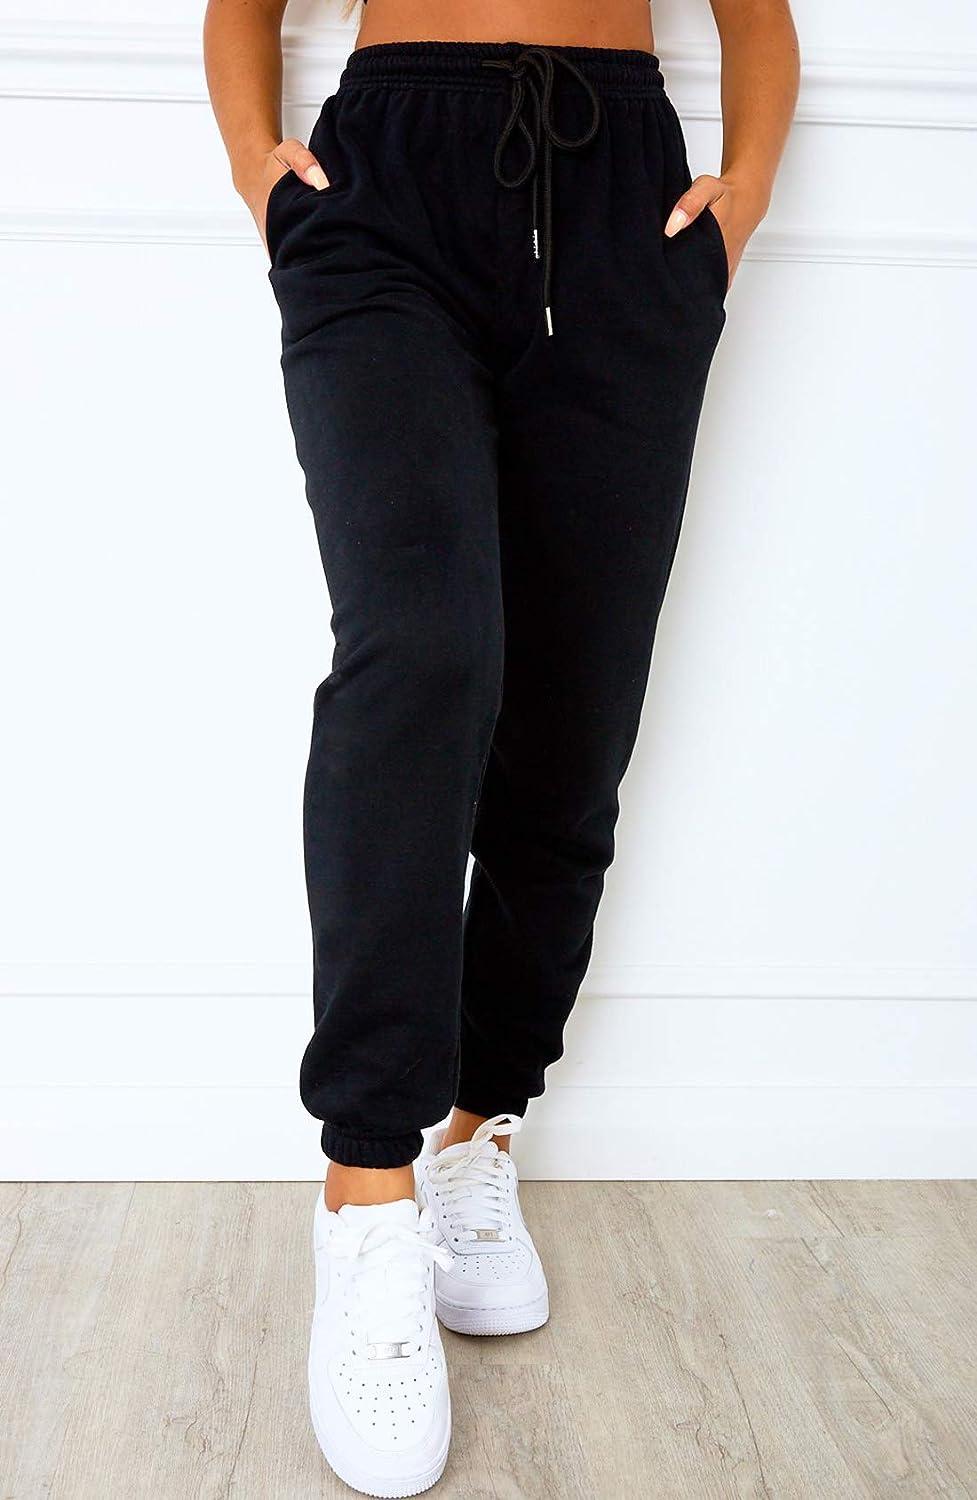 Women's Cinch Bottom Sweatpants in High Waisted Style